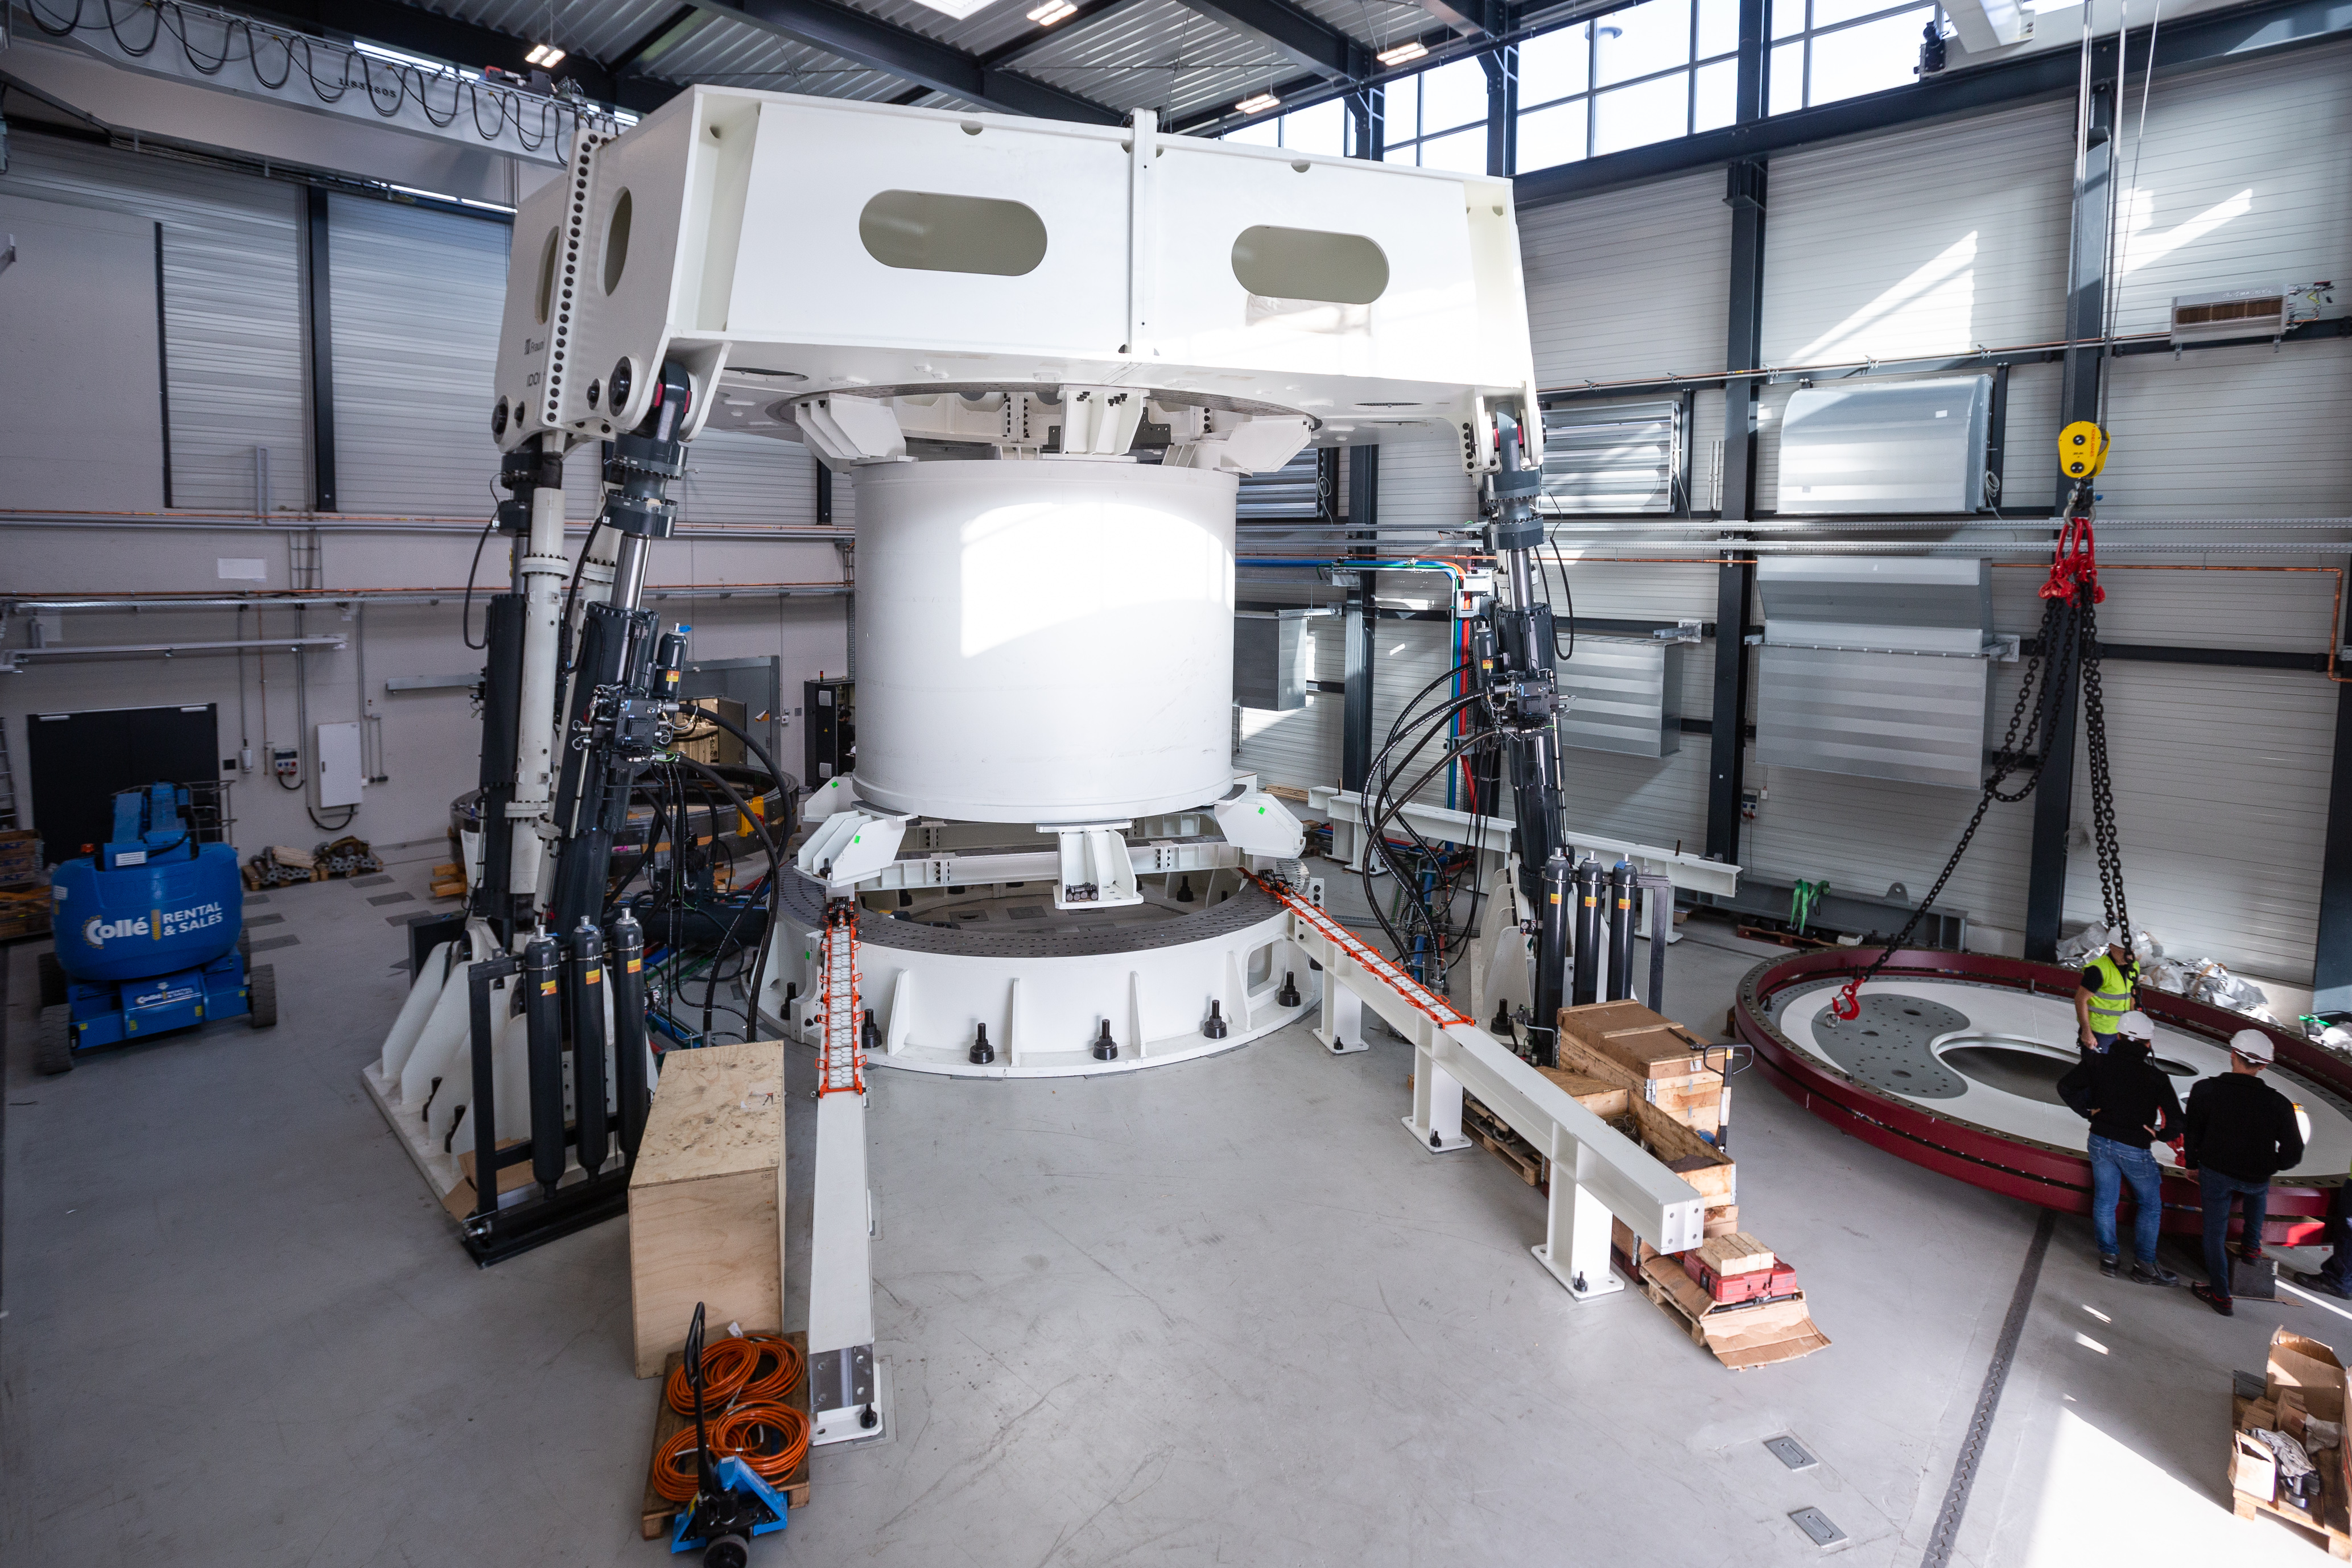 The highly innovative bearing test rig for offshore wind turbines.